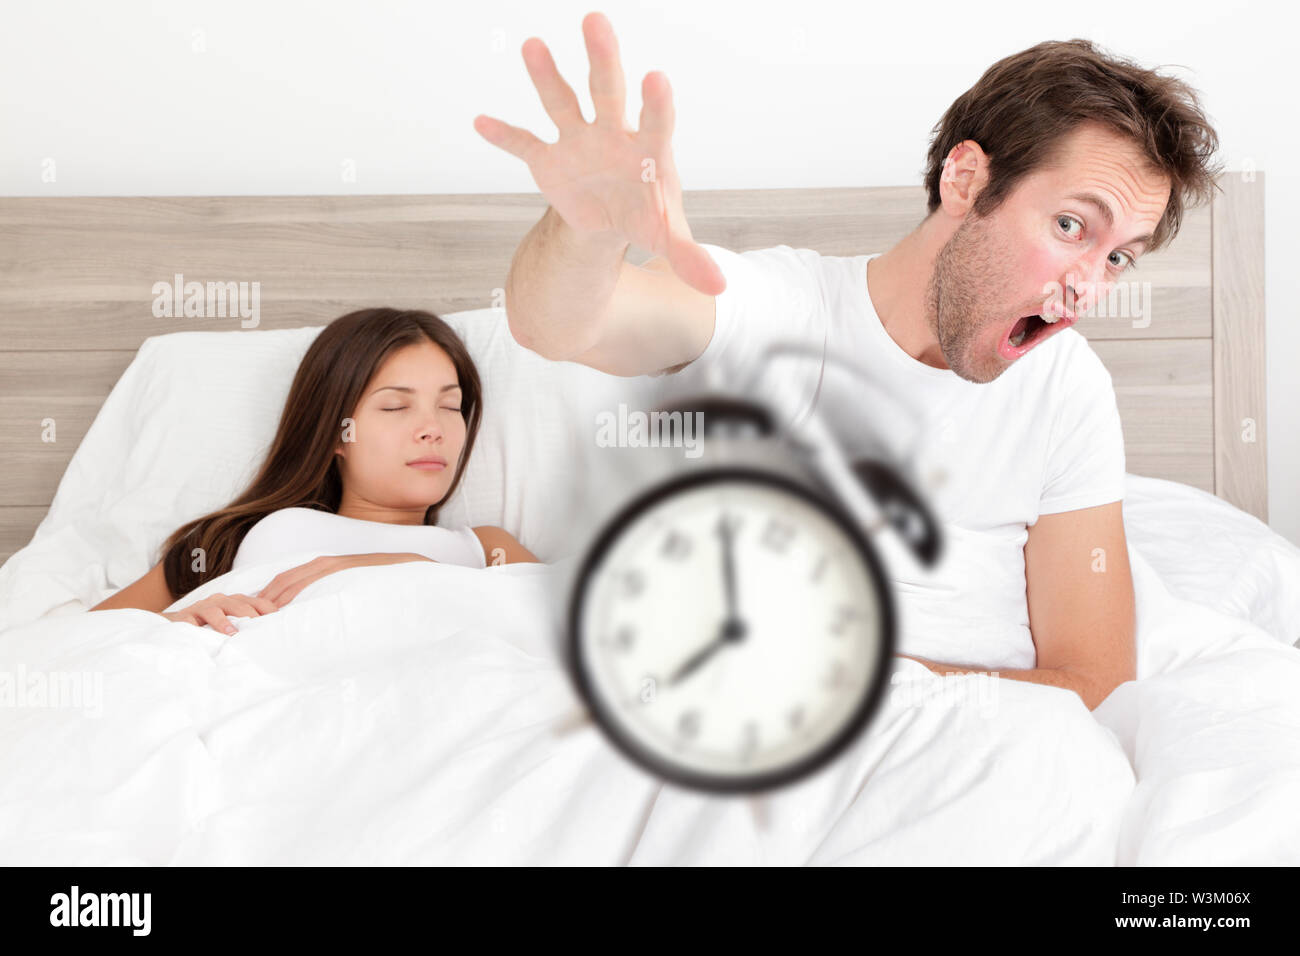 Wake up - couple waking up early throwing alarm clock. Funny bed concept with young interracial couple waking up late. Man throwing alarm clock, and woman sleeping. Asian female, Caucasian male models Stock Photo